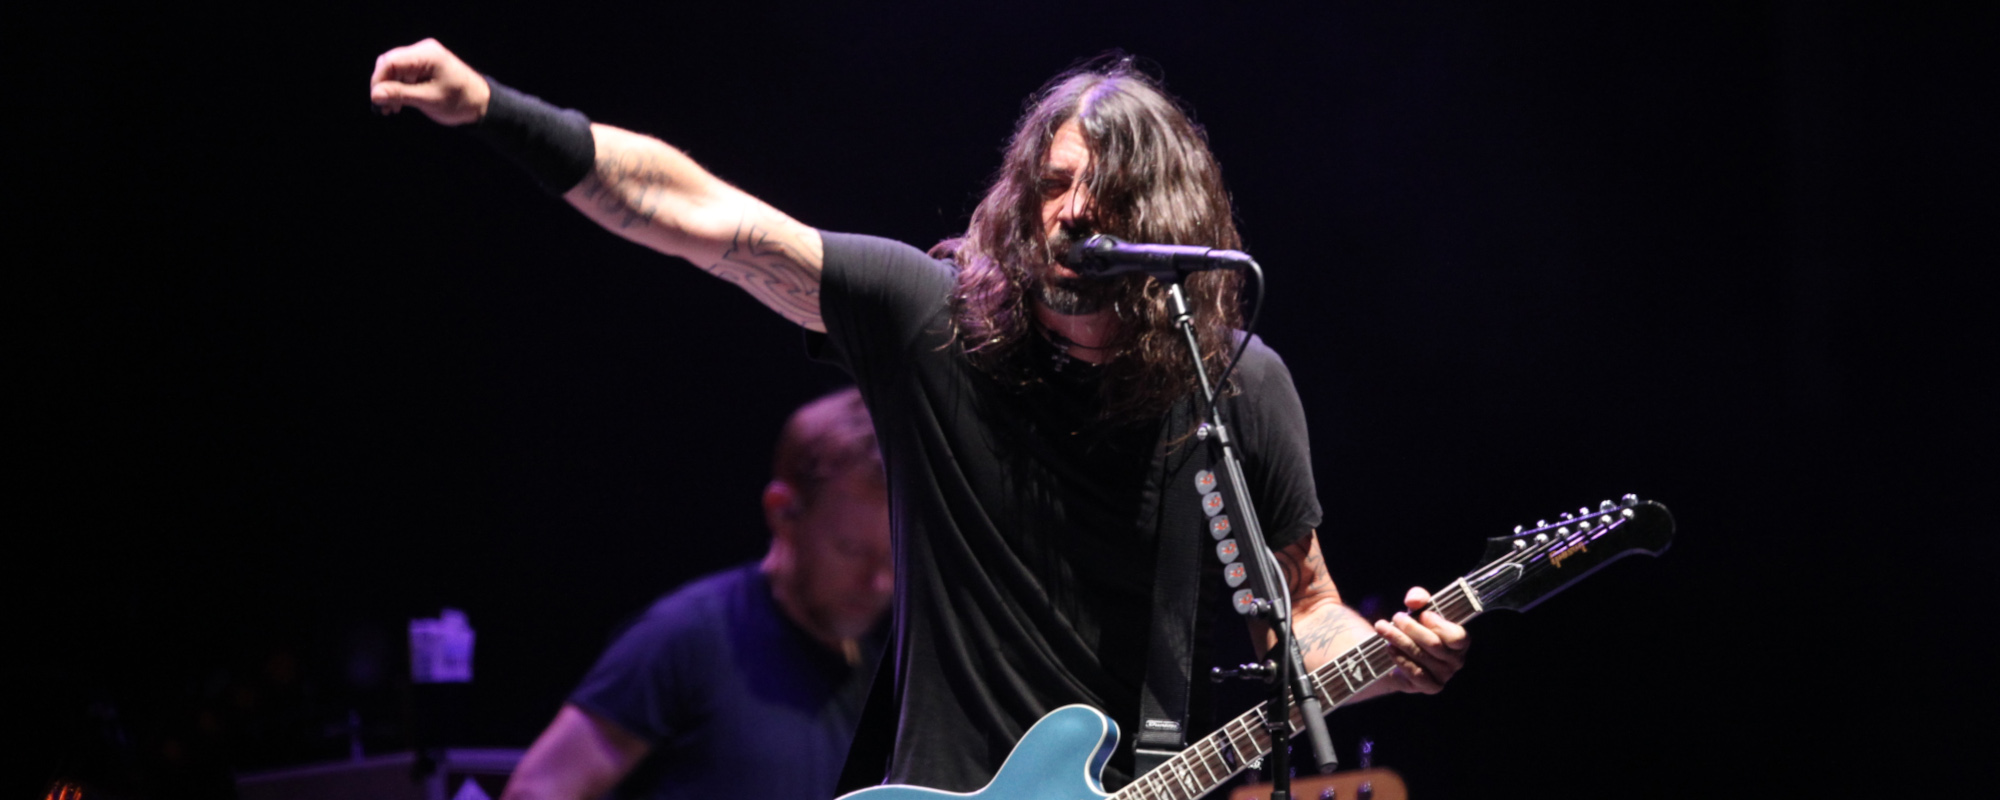 Dave Grohl Remembers Friend and Collaborator Mark Lanegan